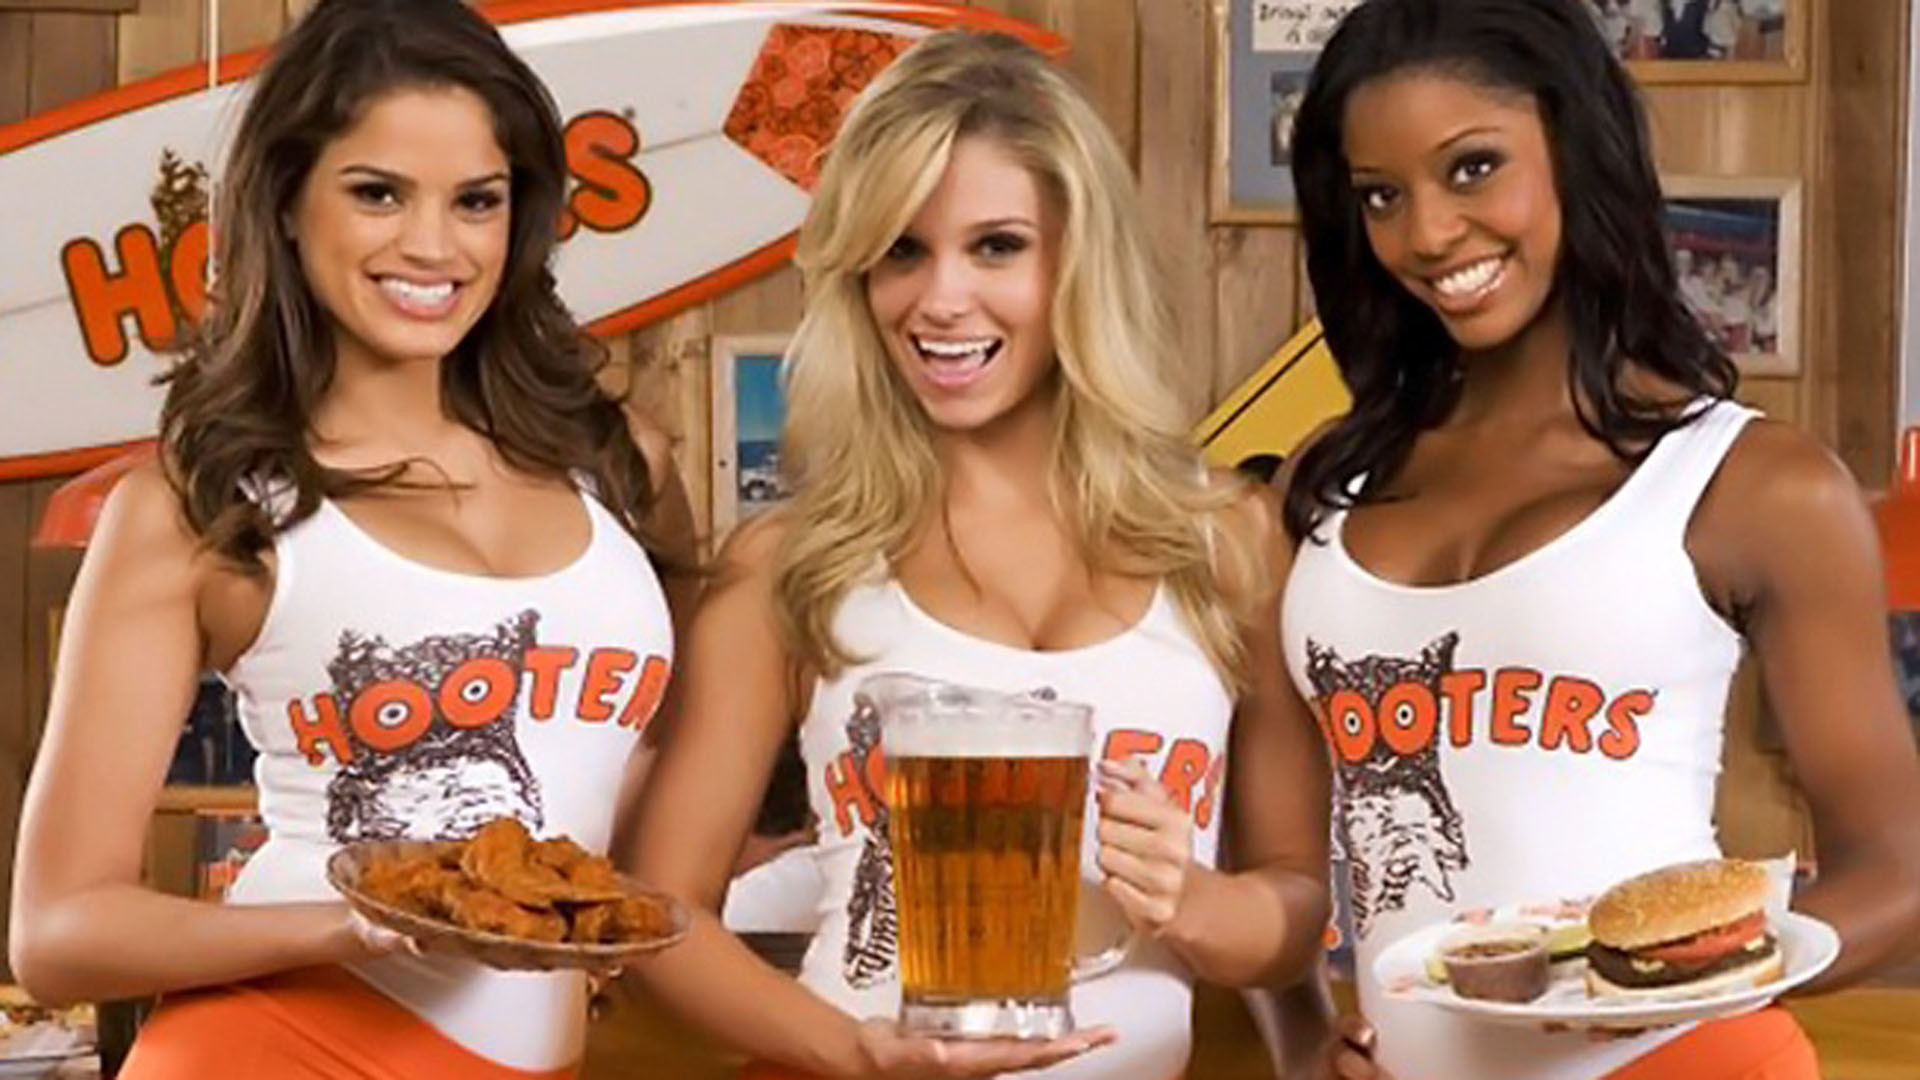 The_Untold_Truth_Of_Hooters.jpg 1920x1080.